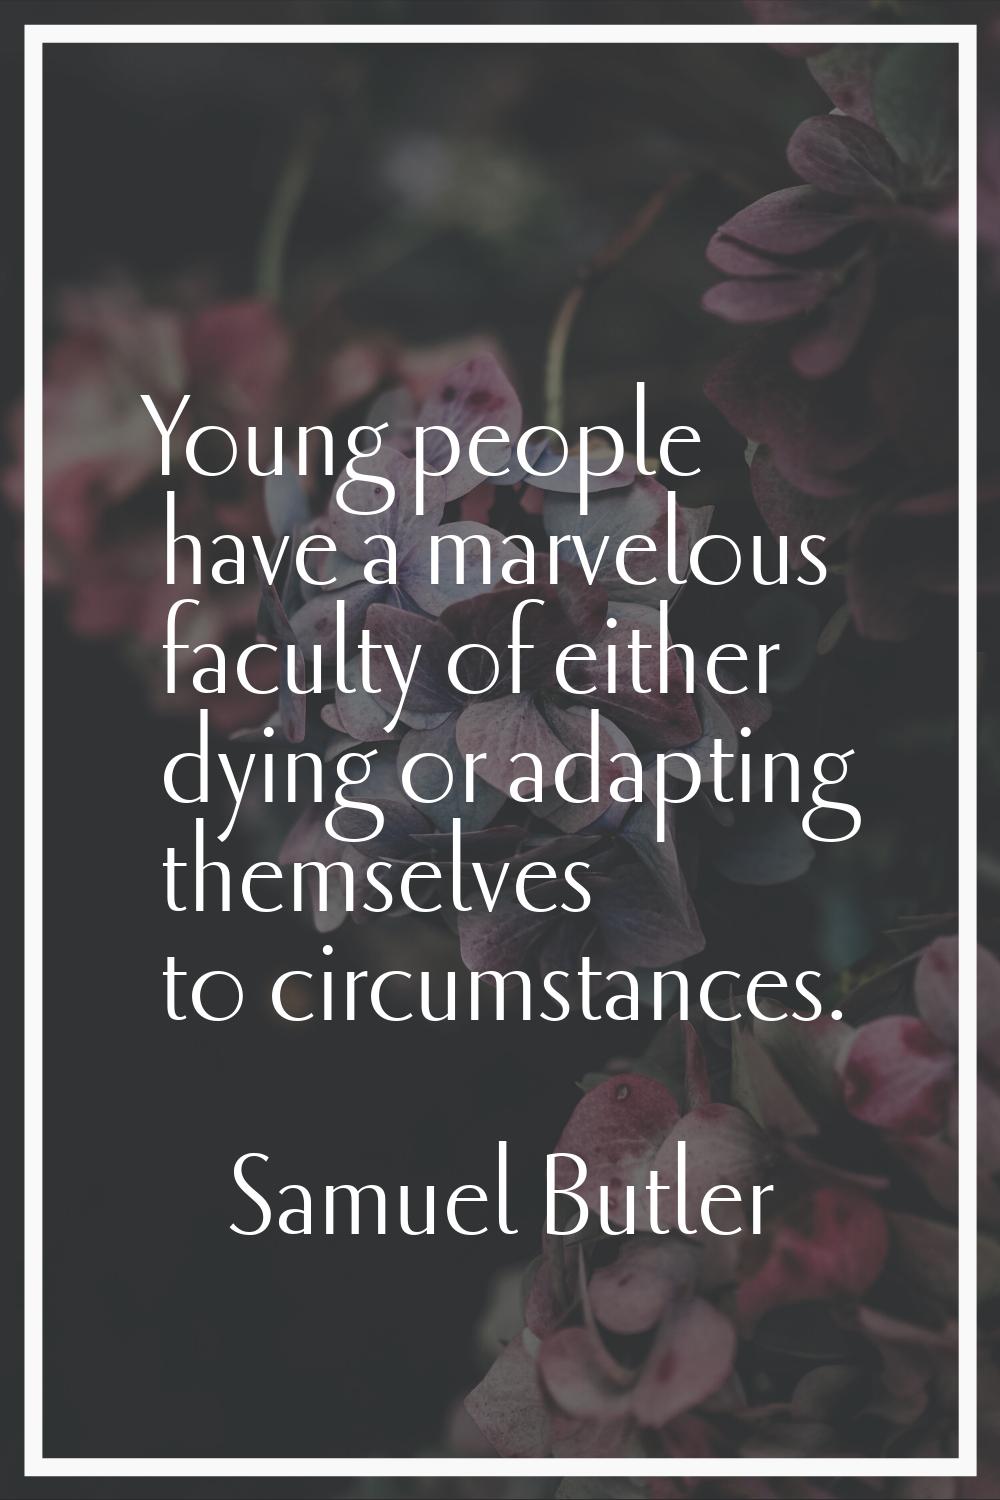 Young people have a marvelous faculty of either dying or adapting themselves to circumstances.